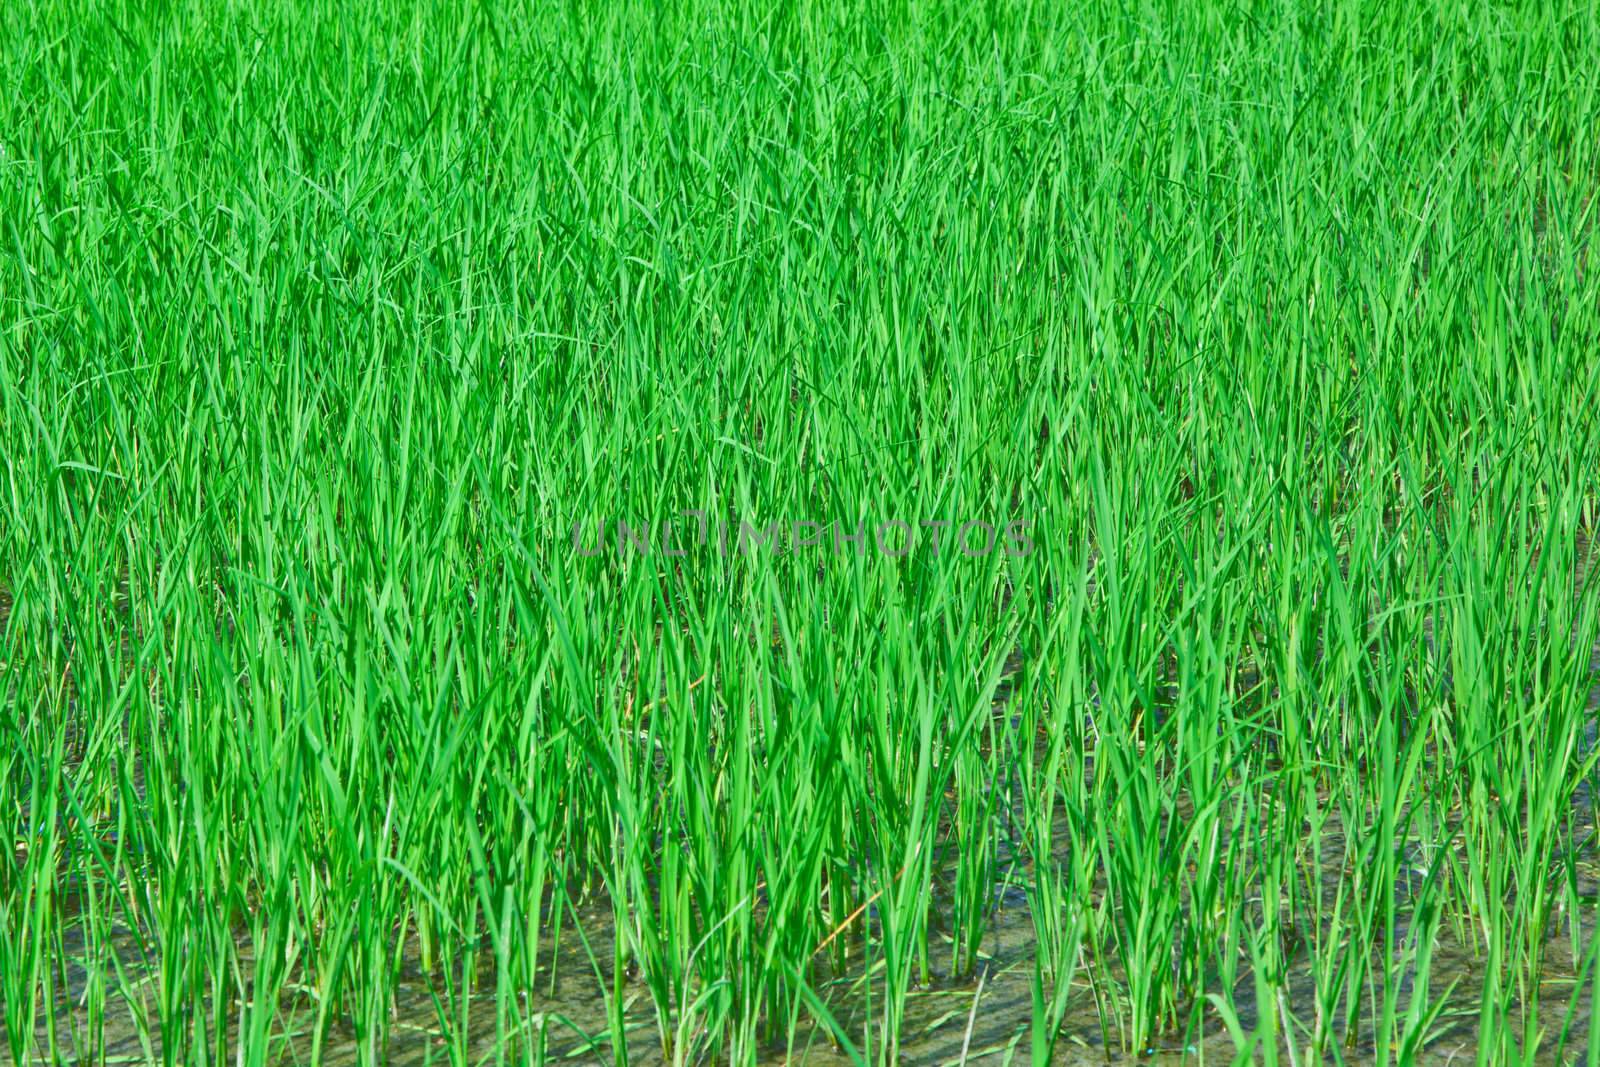 Rice field in rural of Thailand and the paddy grew well.